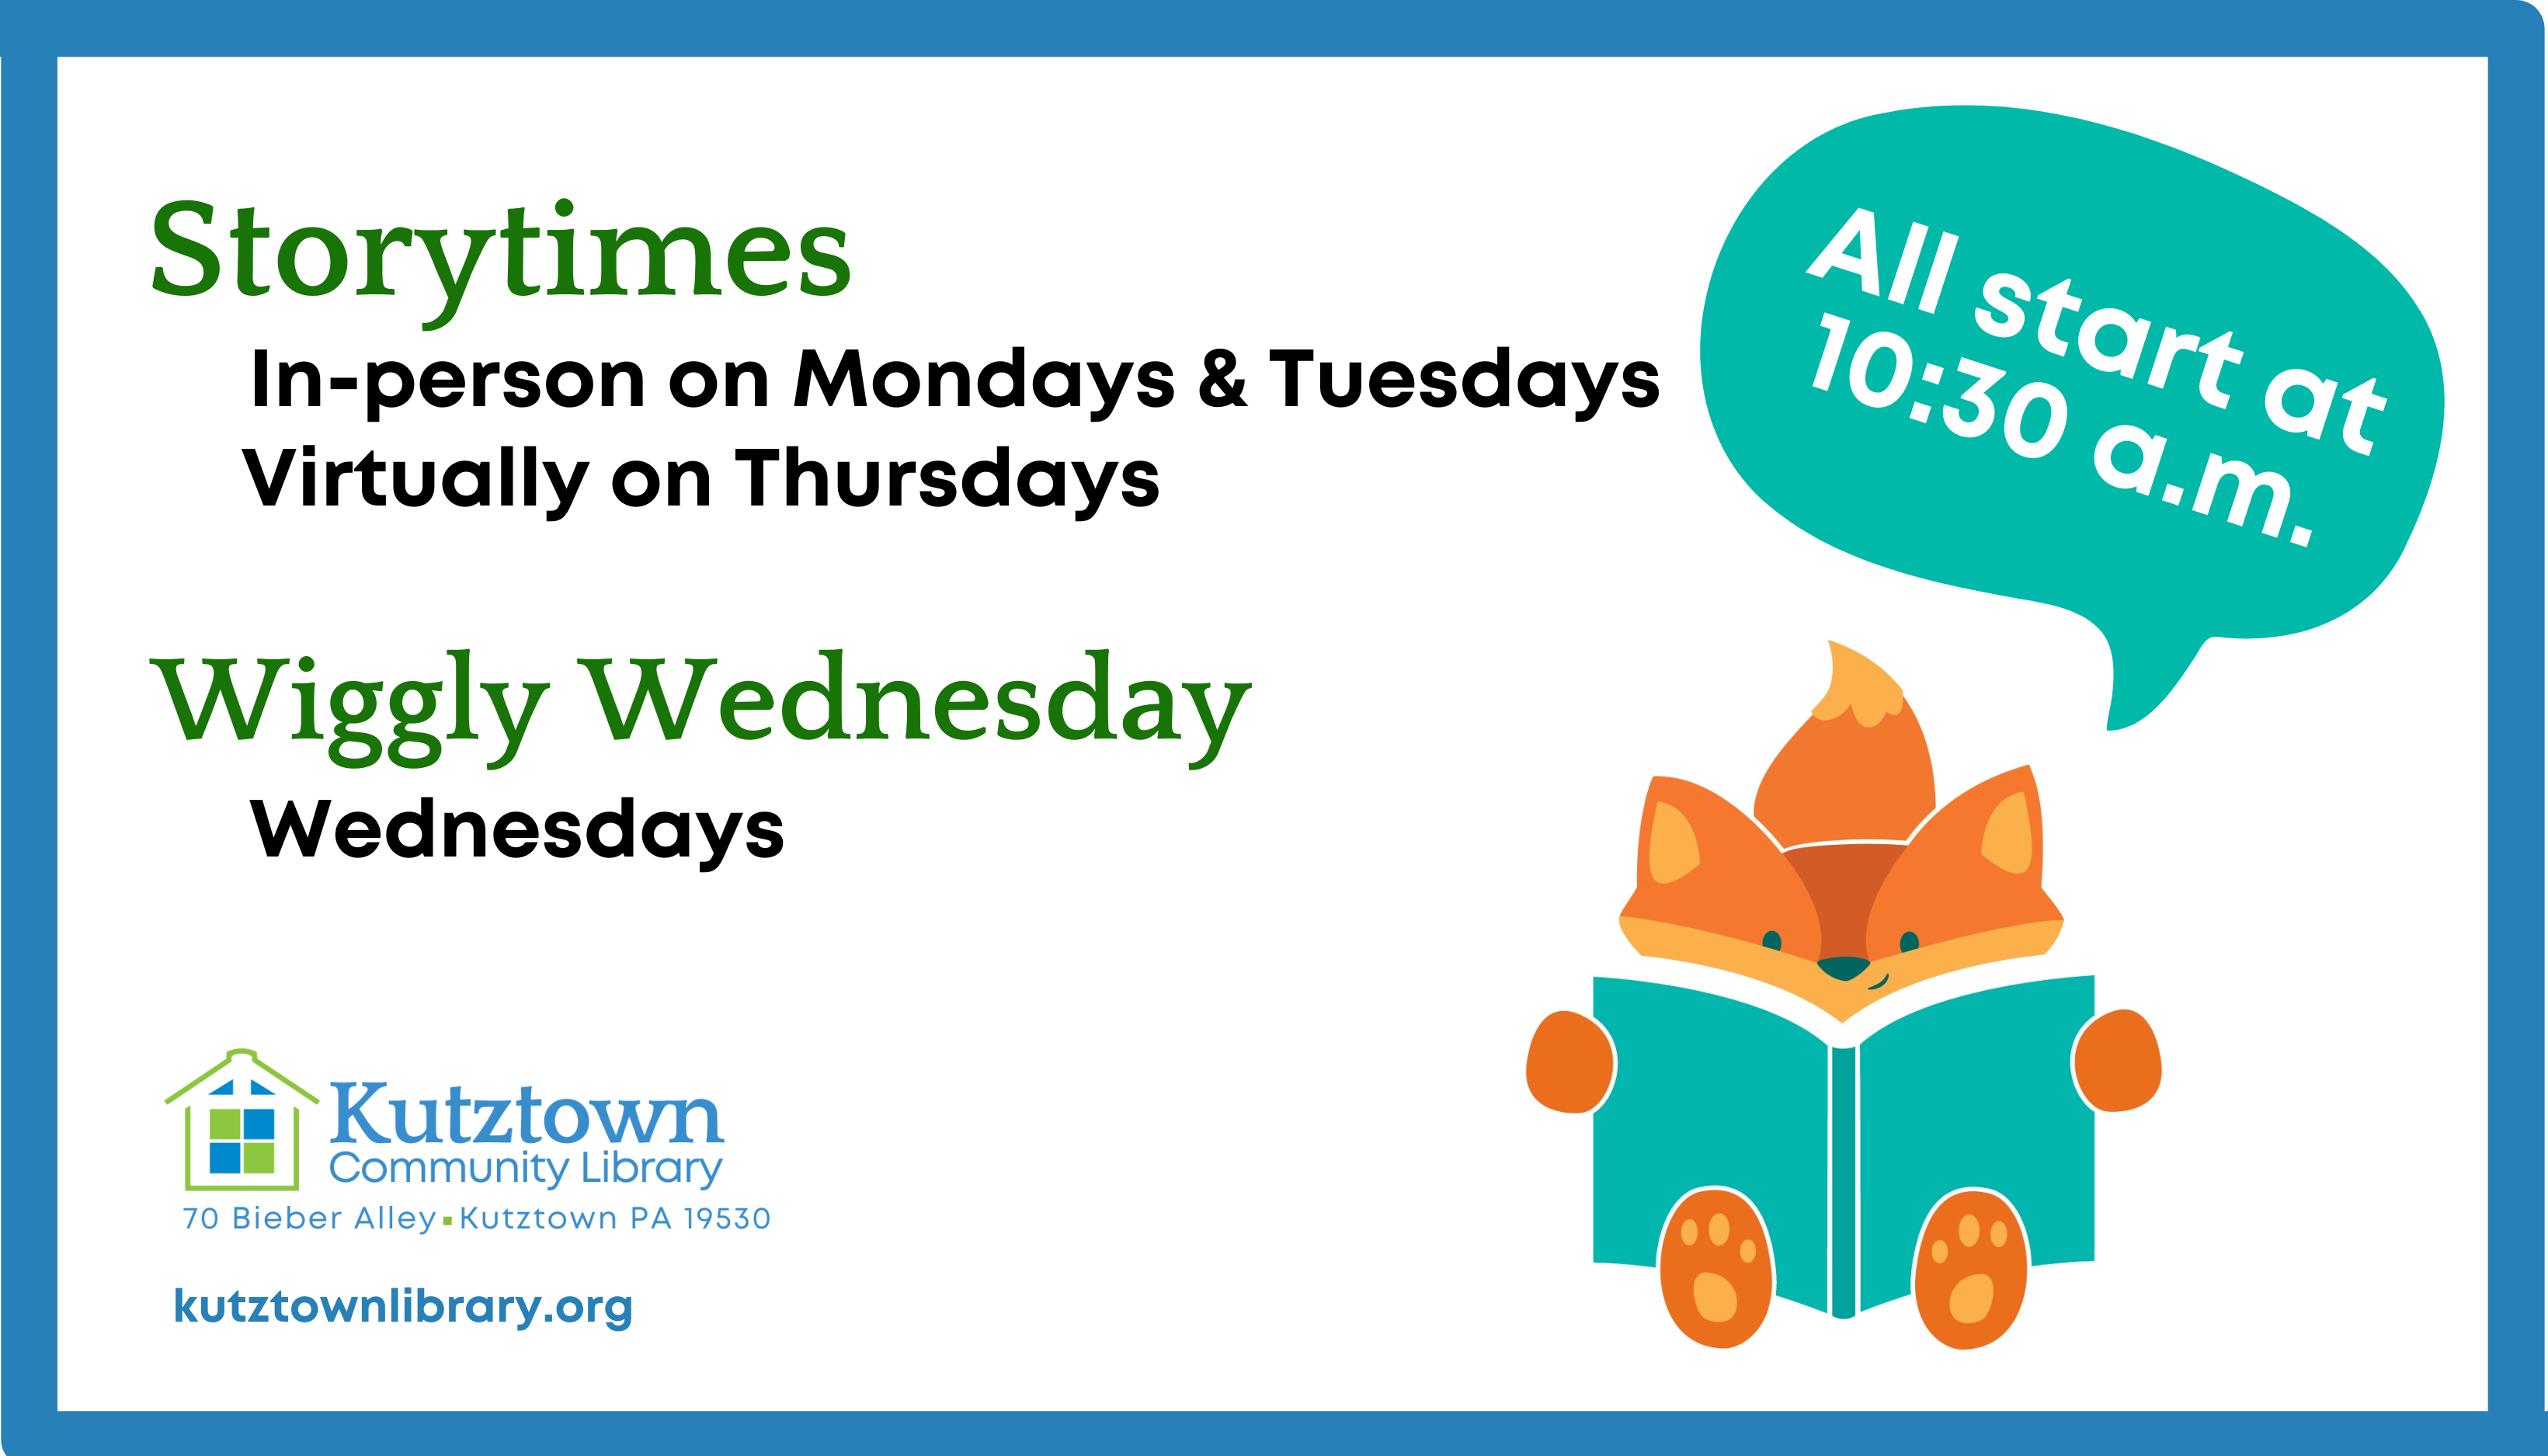 Check out Storytimes on Mondays and Tuesdays at 10:30 a.m. 